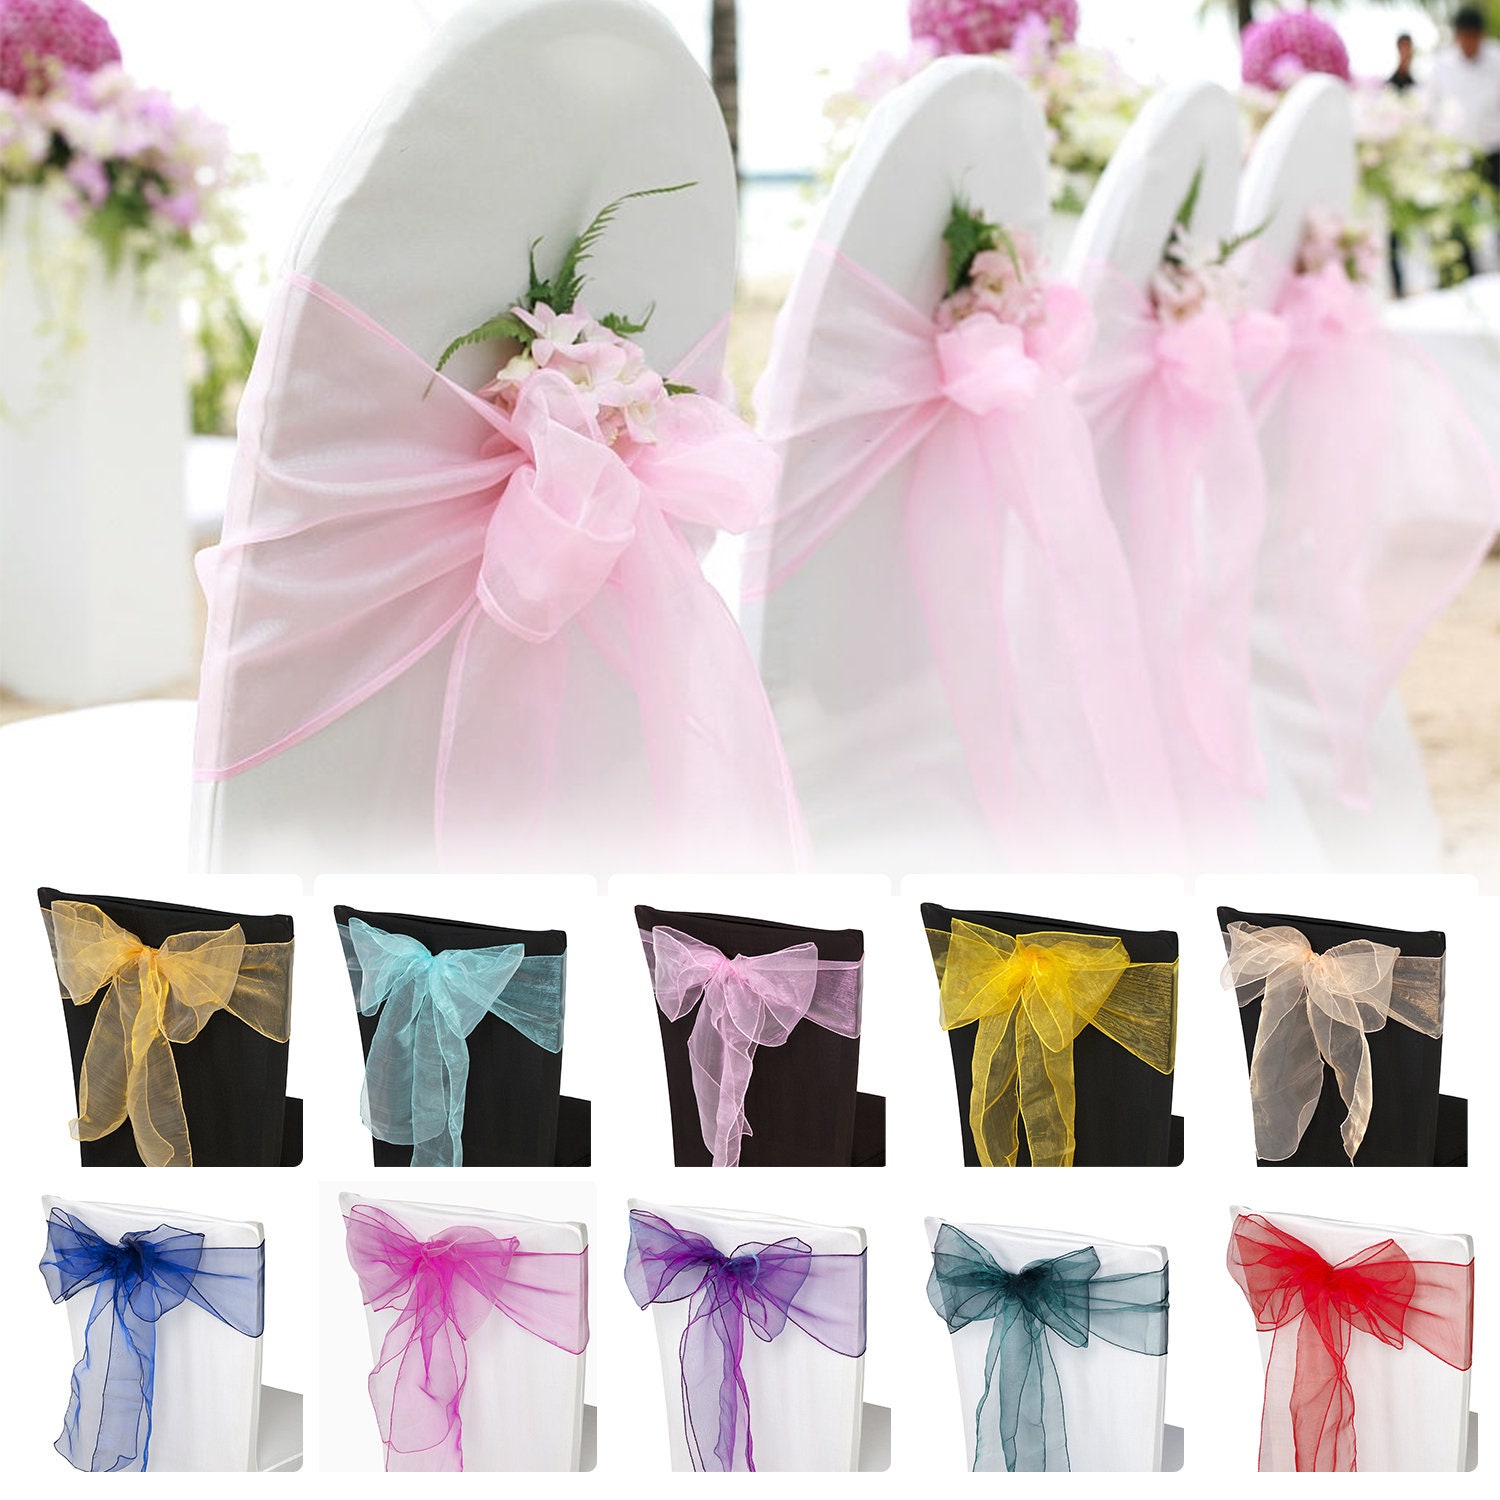 Organza Sashes Chair Cover Bows Sash Wider Sash Fuller Bows Roll 40cm x 9m For Wedding Décor Party Birthday Decoration White 